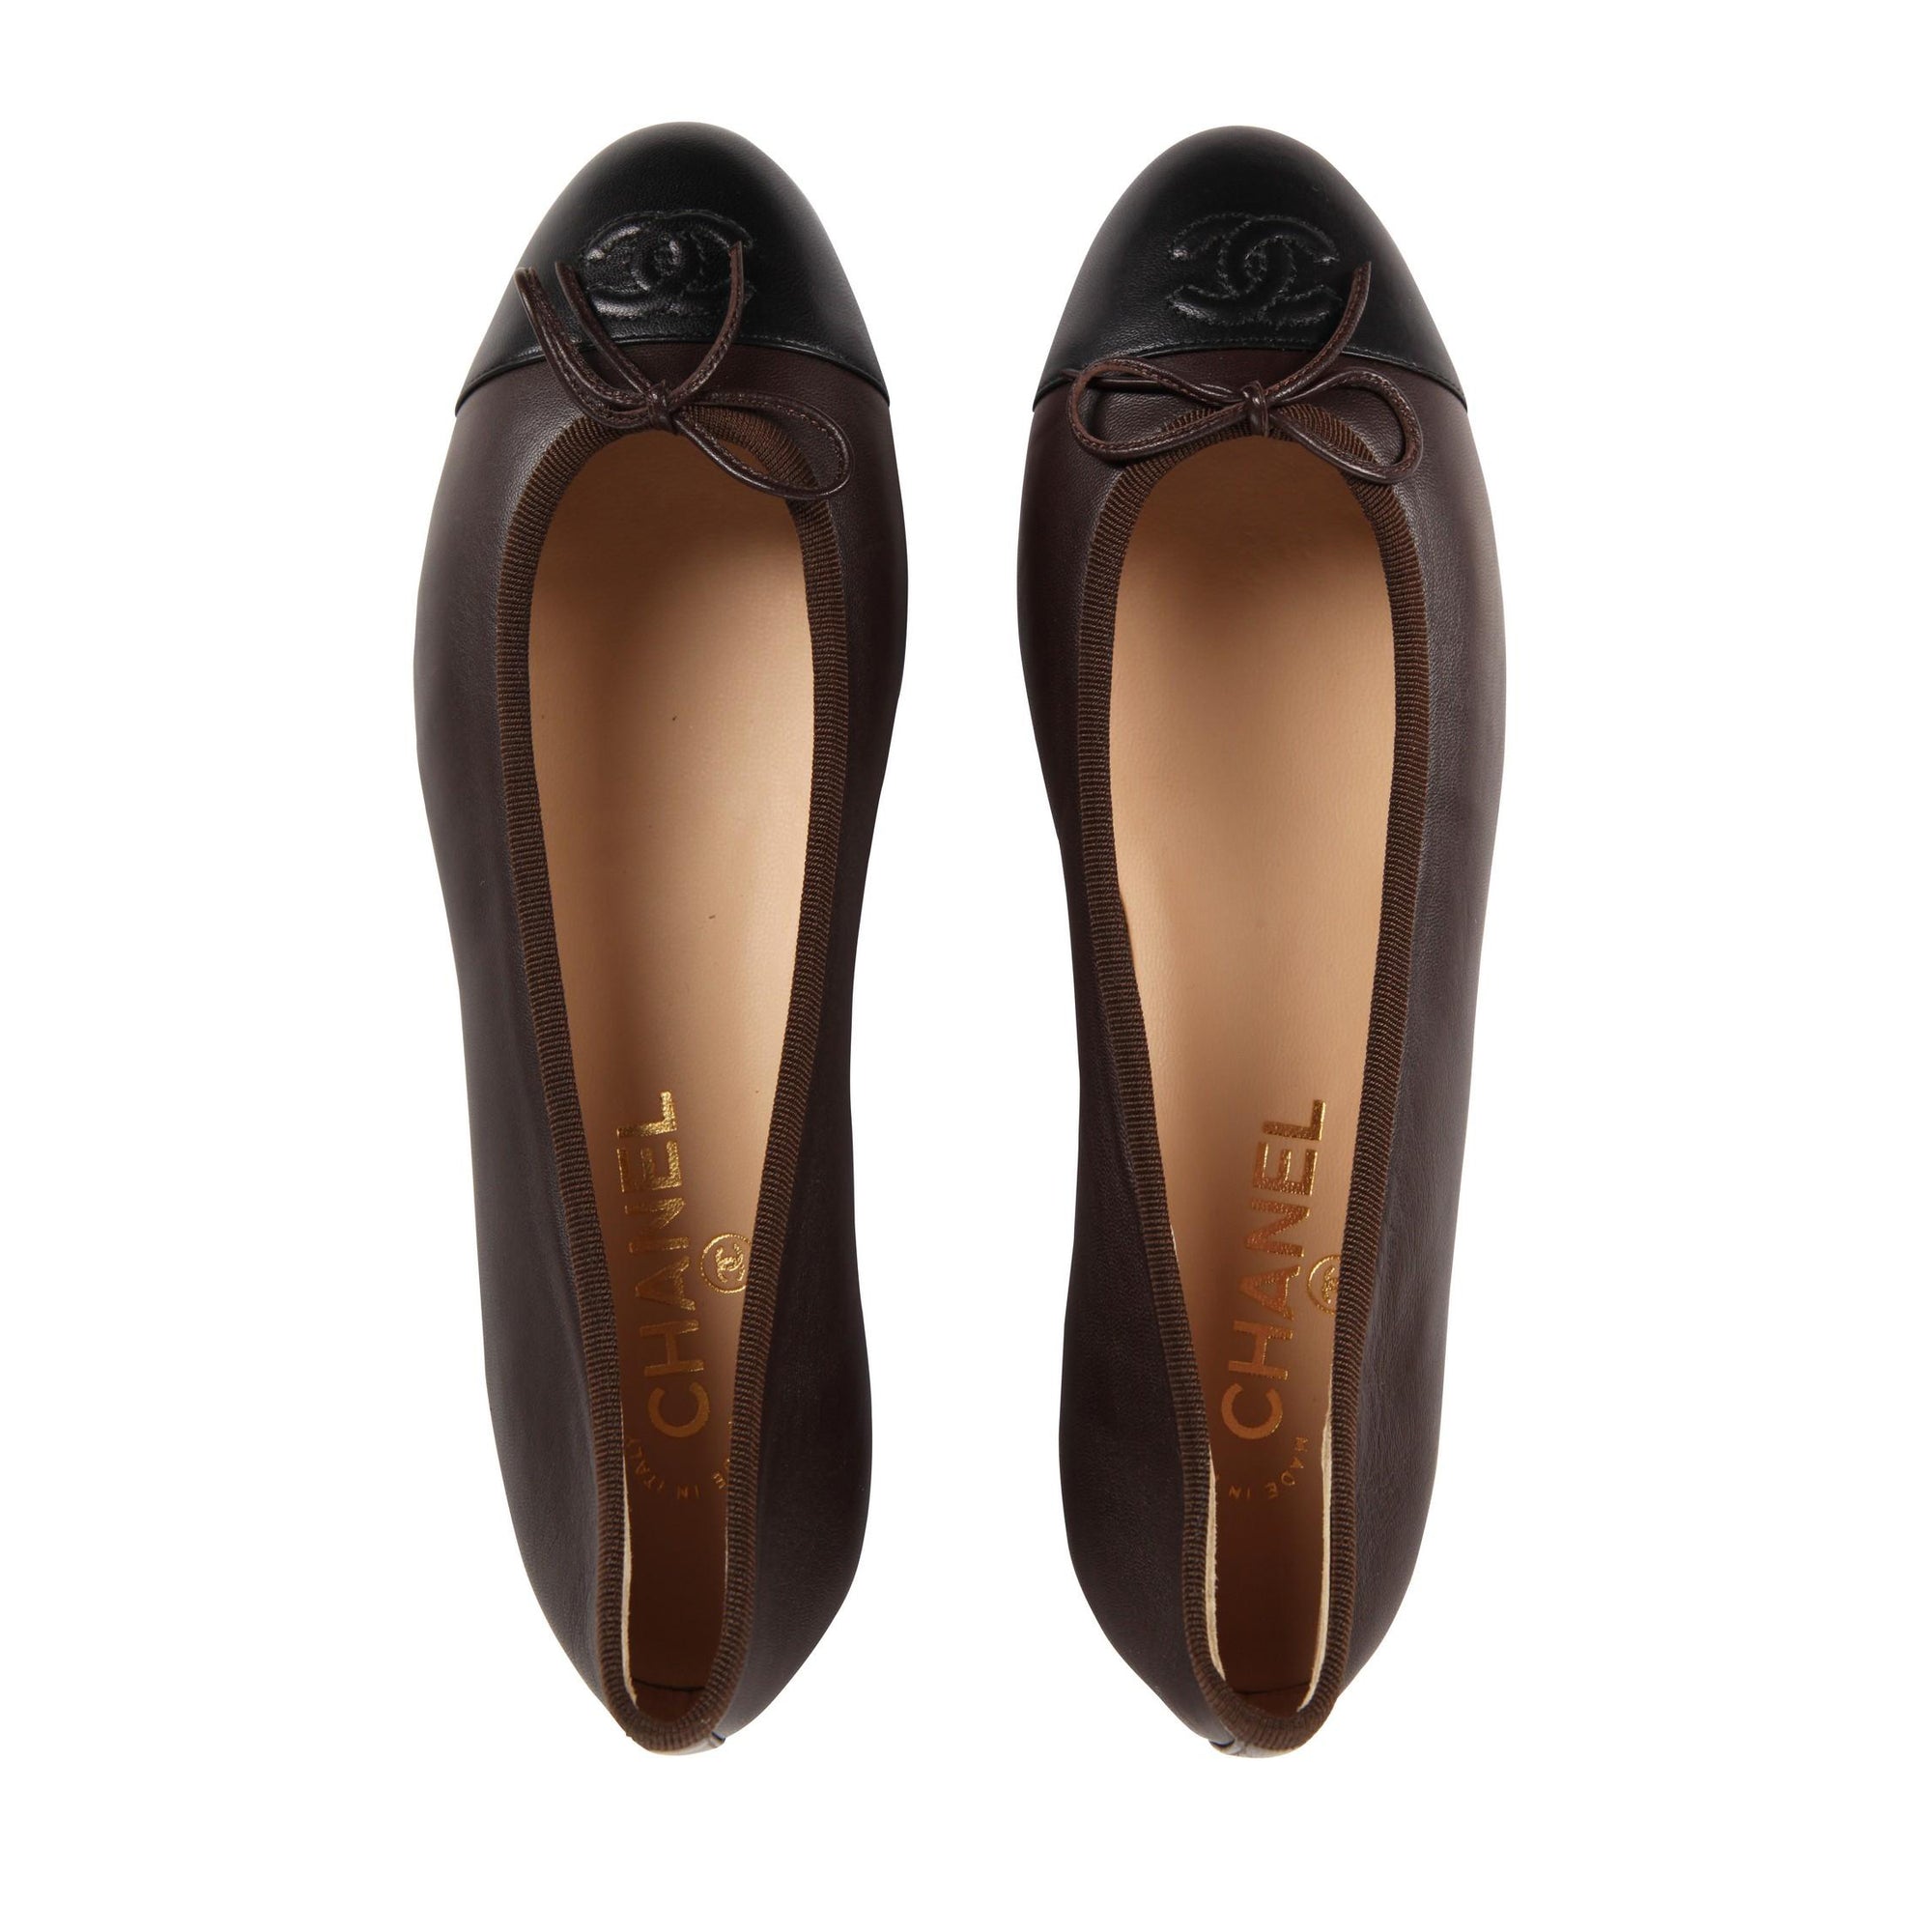 Chanel Brown Two-tone Leather Ballet Flats - Size 38.5 EU/ 8.5 US